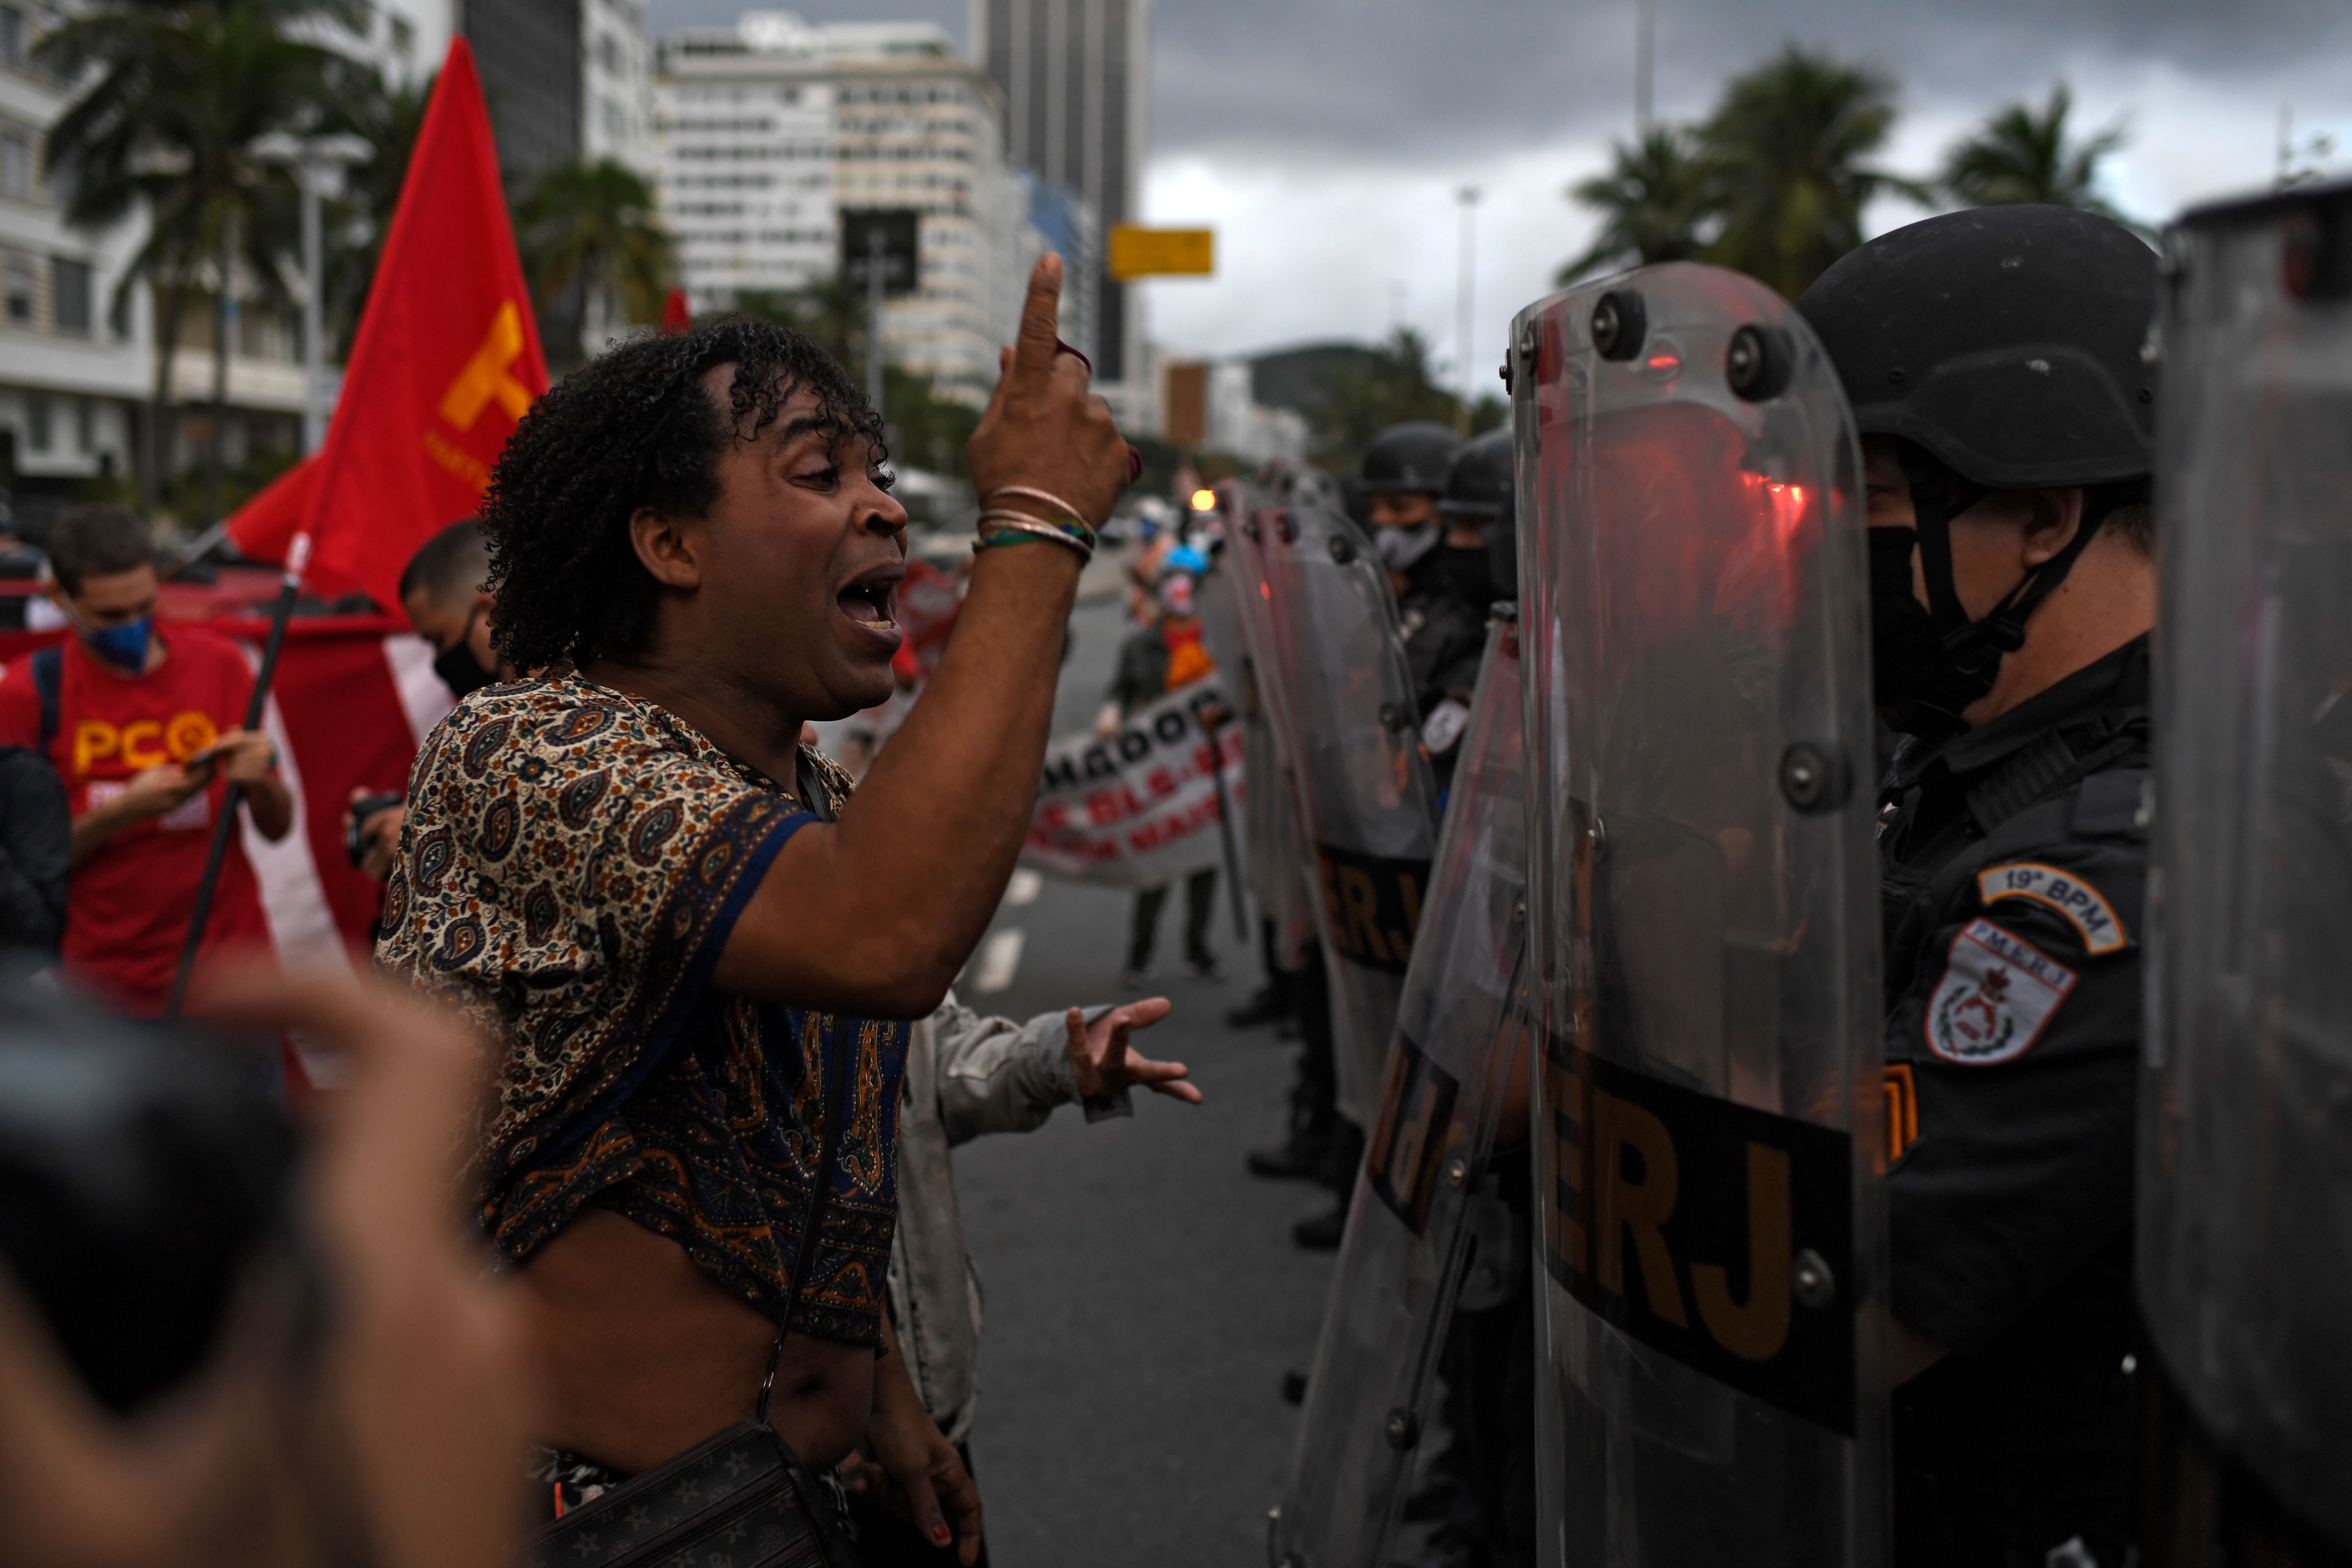 An LGBT activist argues with military police soldiers during a protest in Brazil